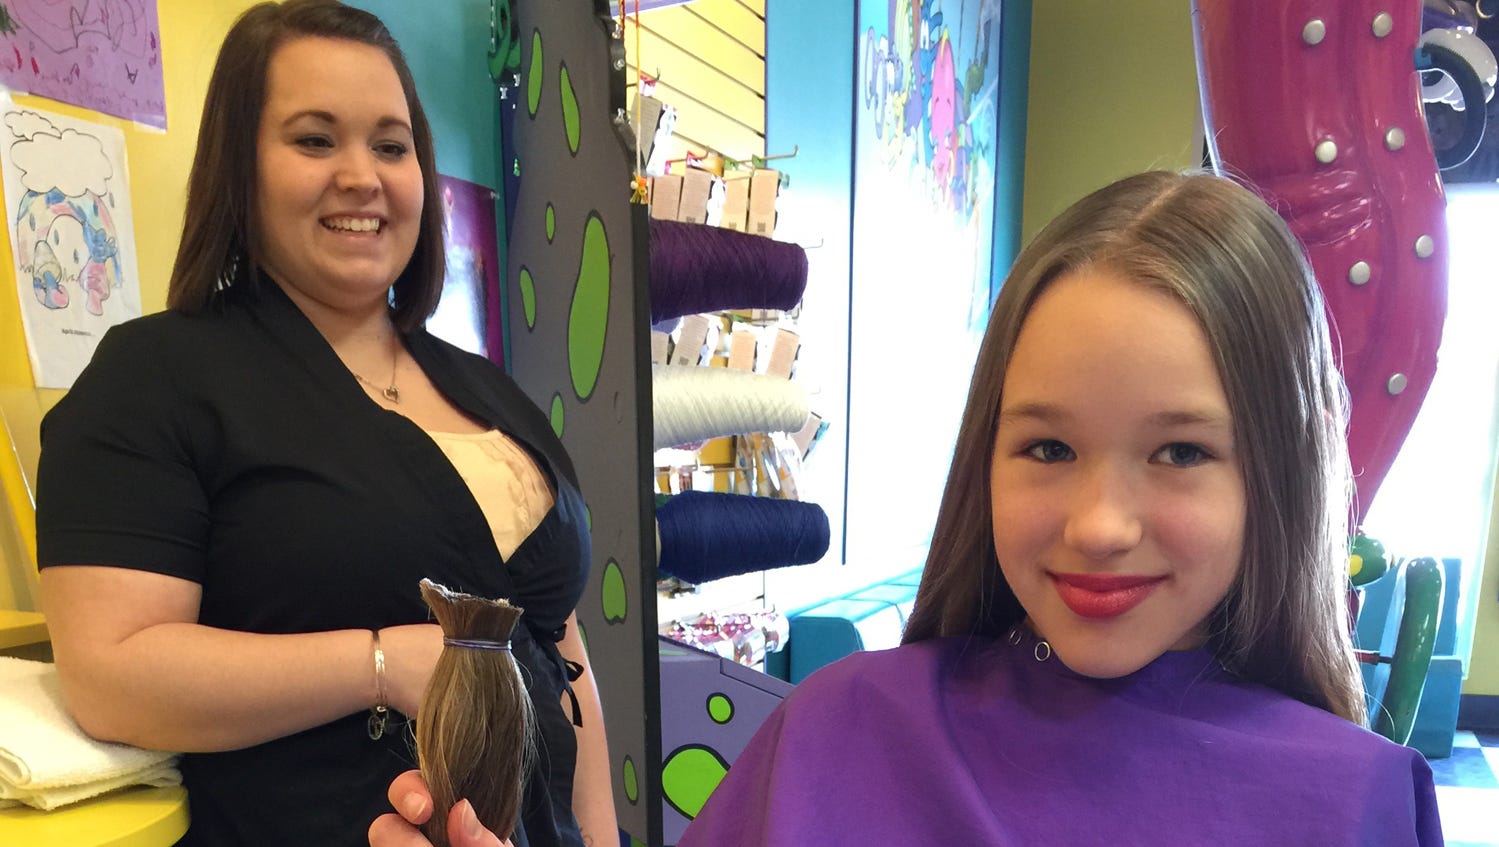 Girl, 9, donates 20 inches of hair to Locks of Love